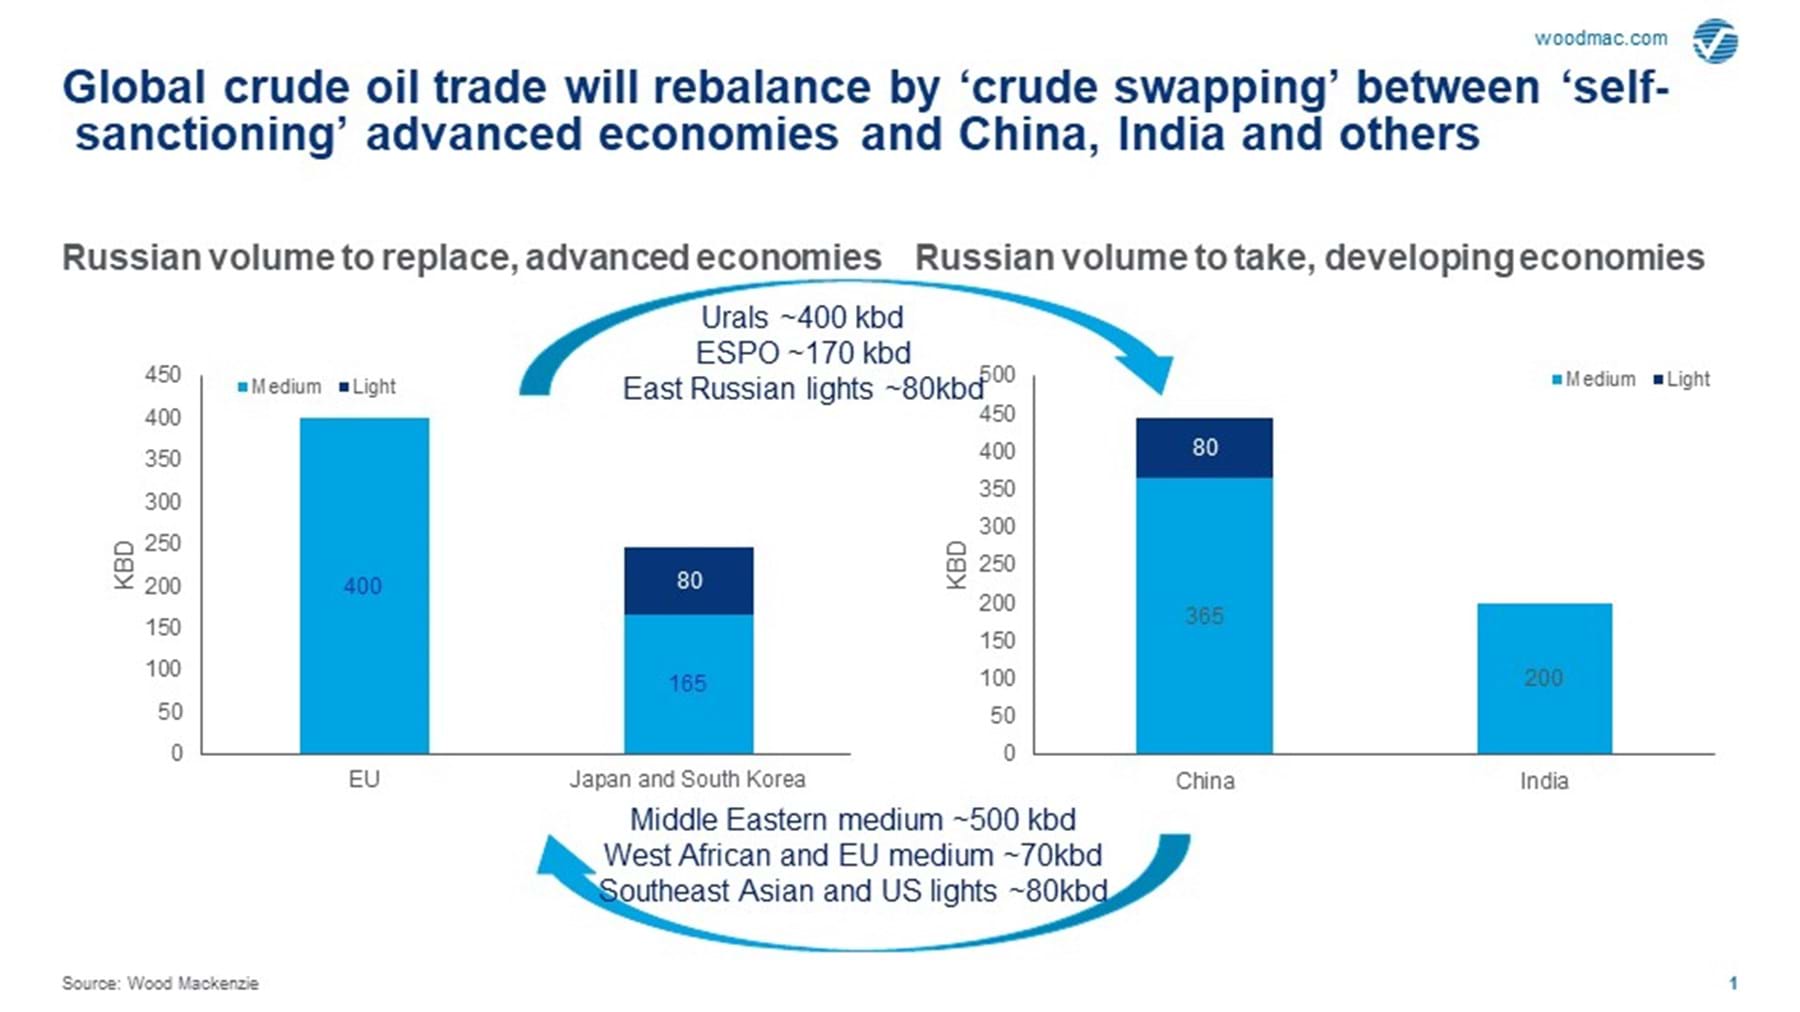 About 650,000 barrels per day of Russian crude oil to be 'swapped' | Wood  Mackenzie